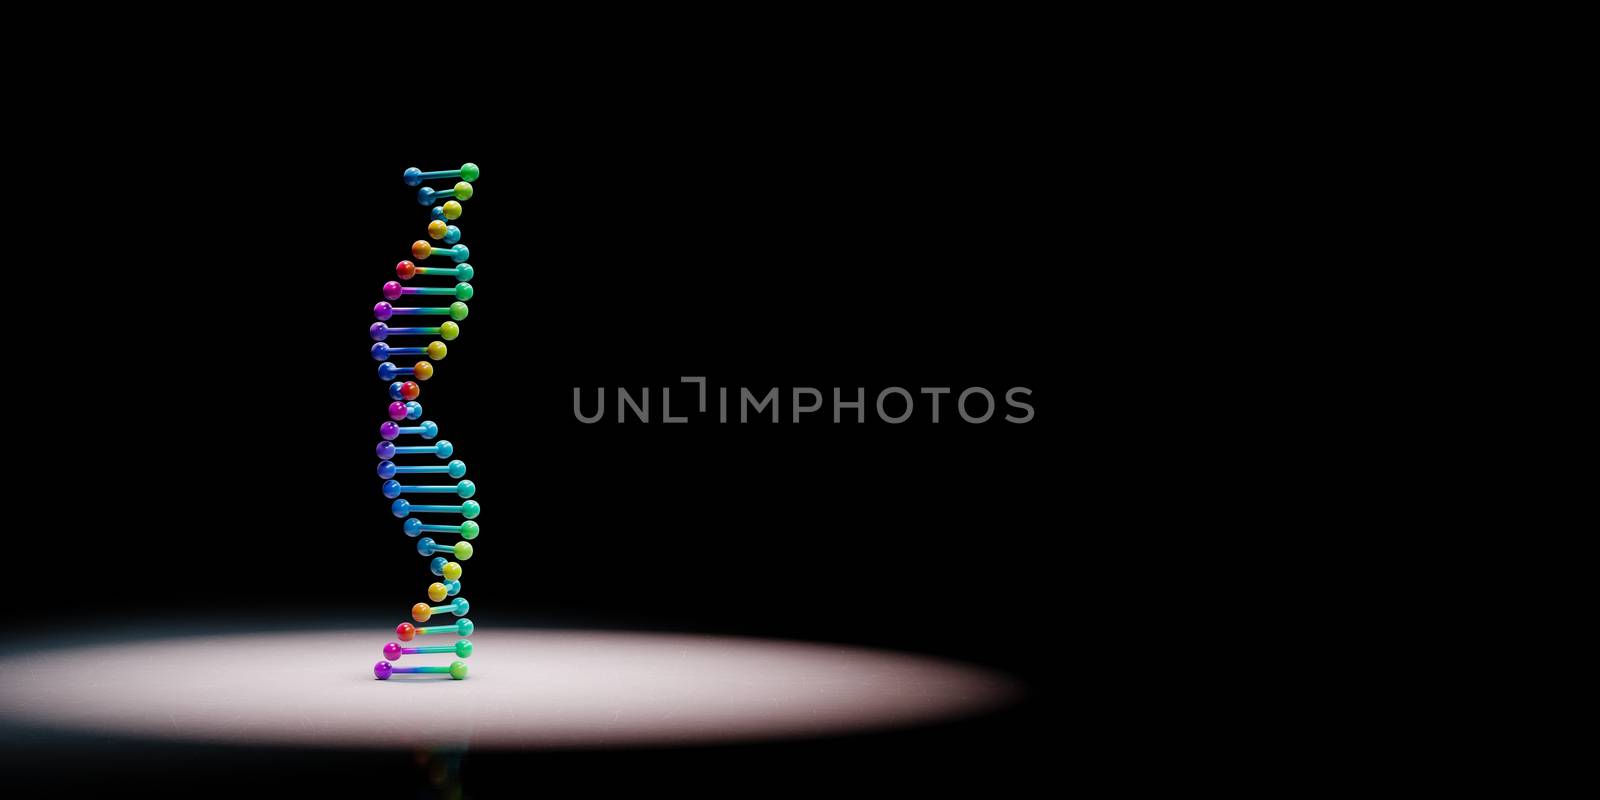 DNA Chain Spotlighted on Black Background by make